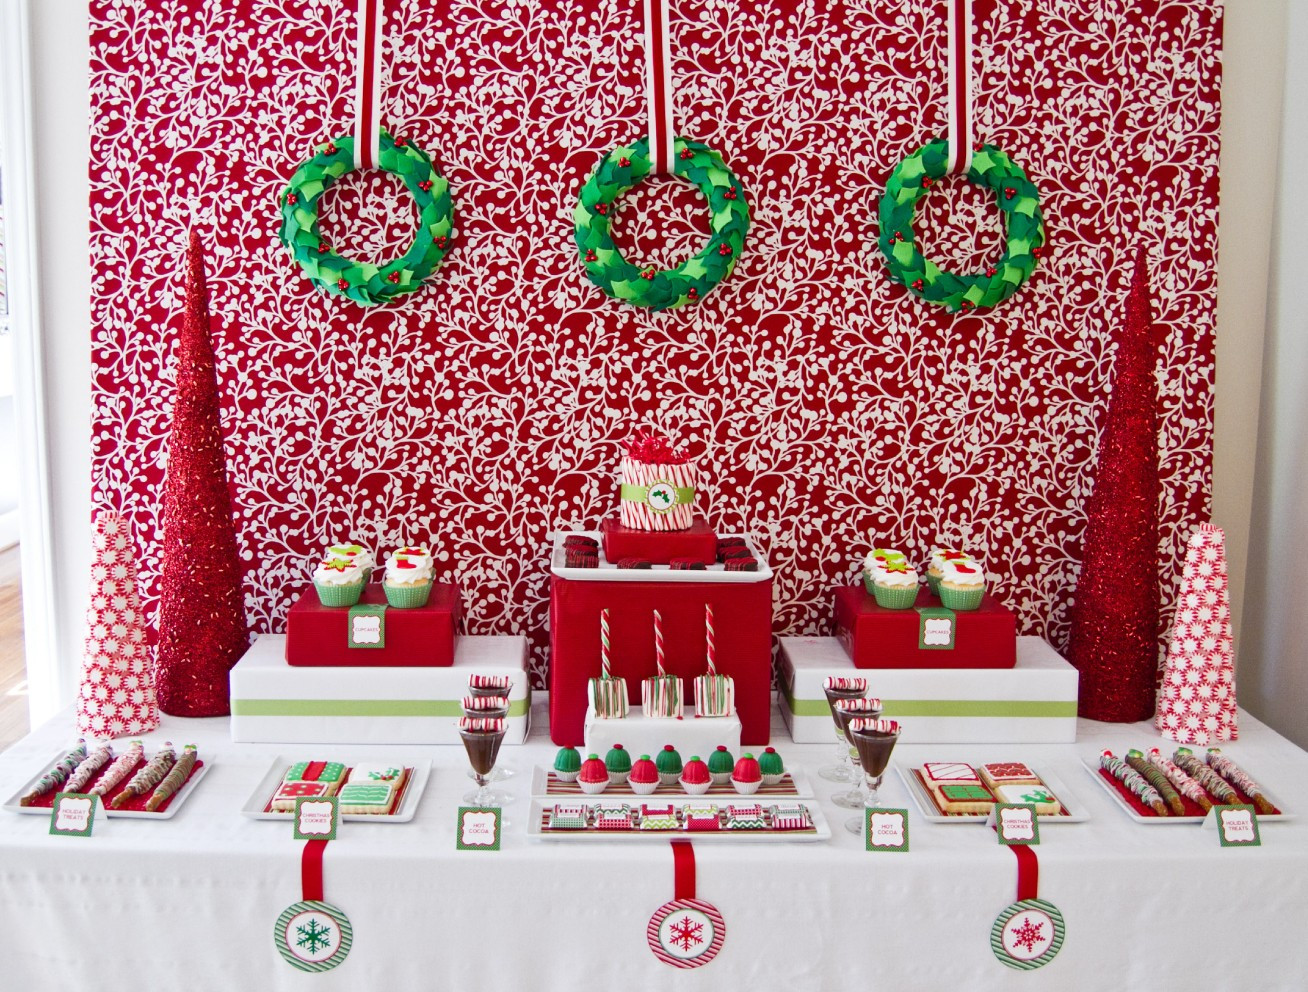 Holiday Party Decorating Ideas
 MON TRESOR Christmas Tables & Inspirations